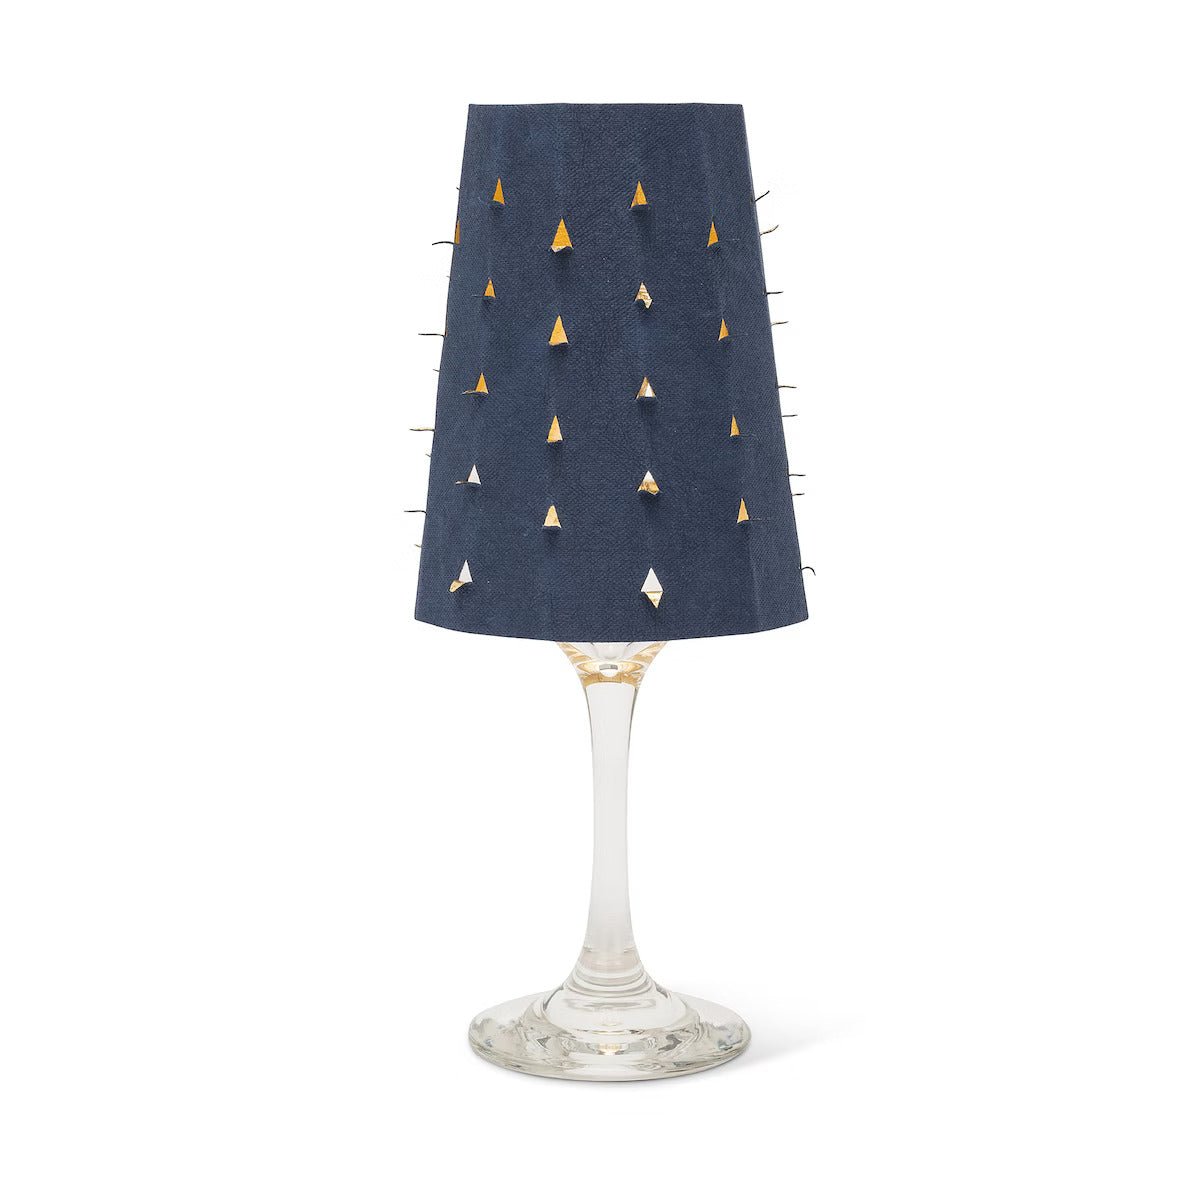 A navy washable paper lampshade with cut out details is shown sitting atop a wine glass.